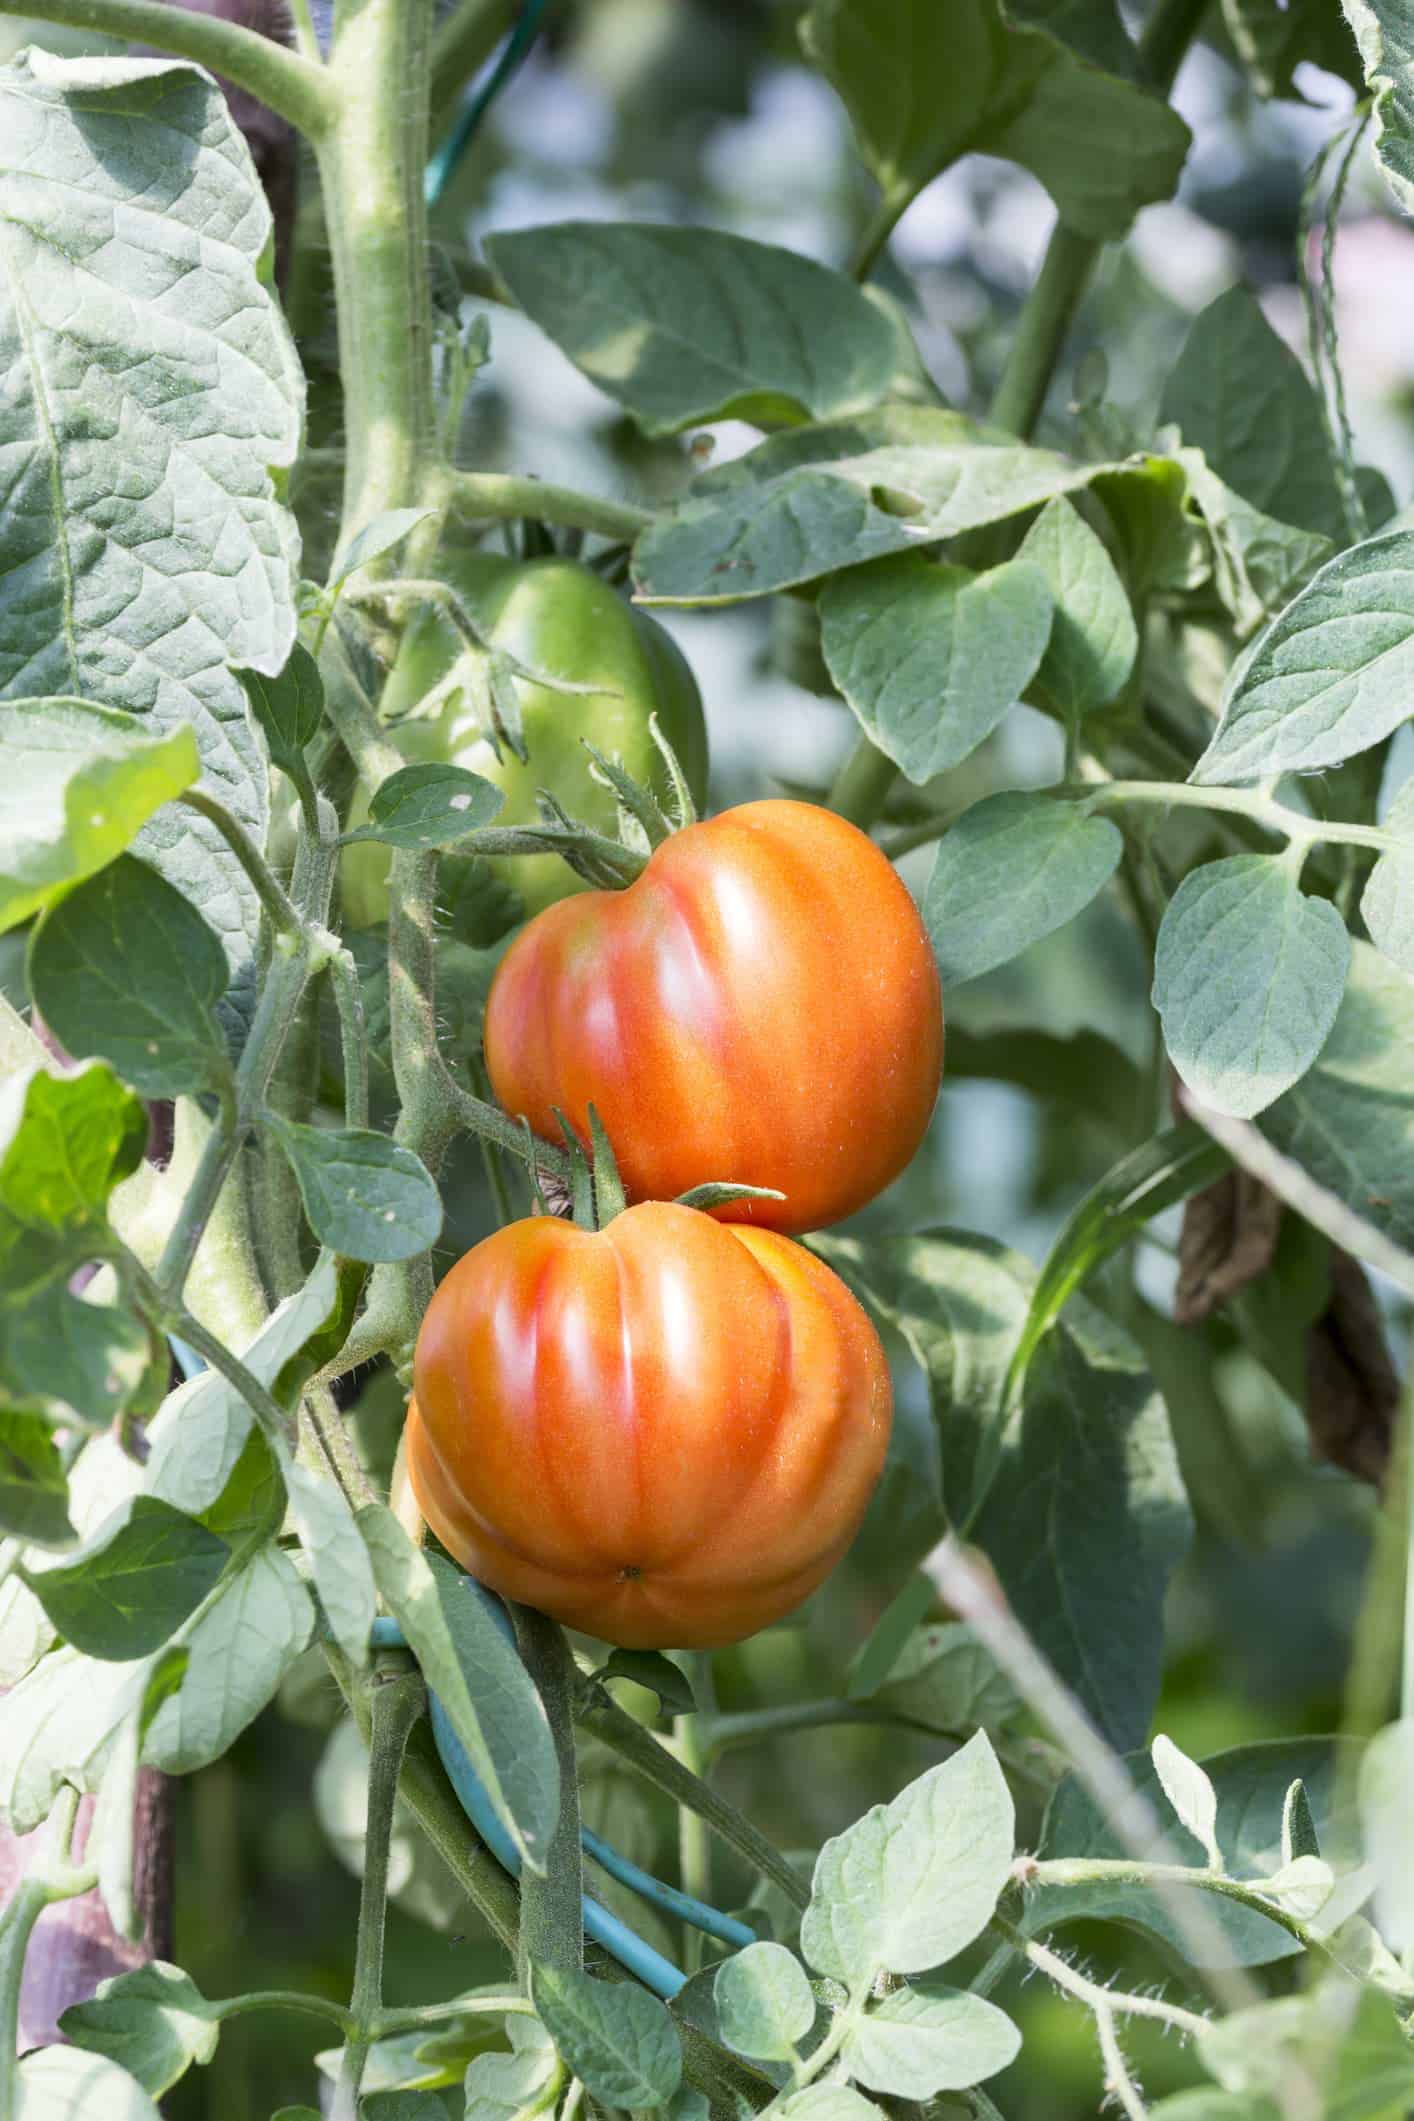 What's the difference between and heirloom tomato and other tomatoes